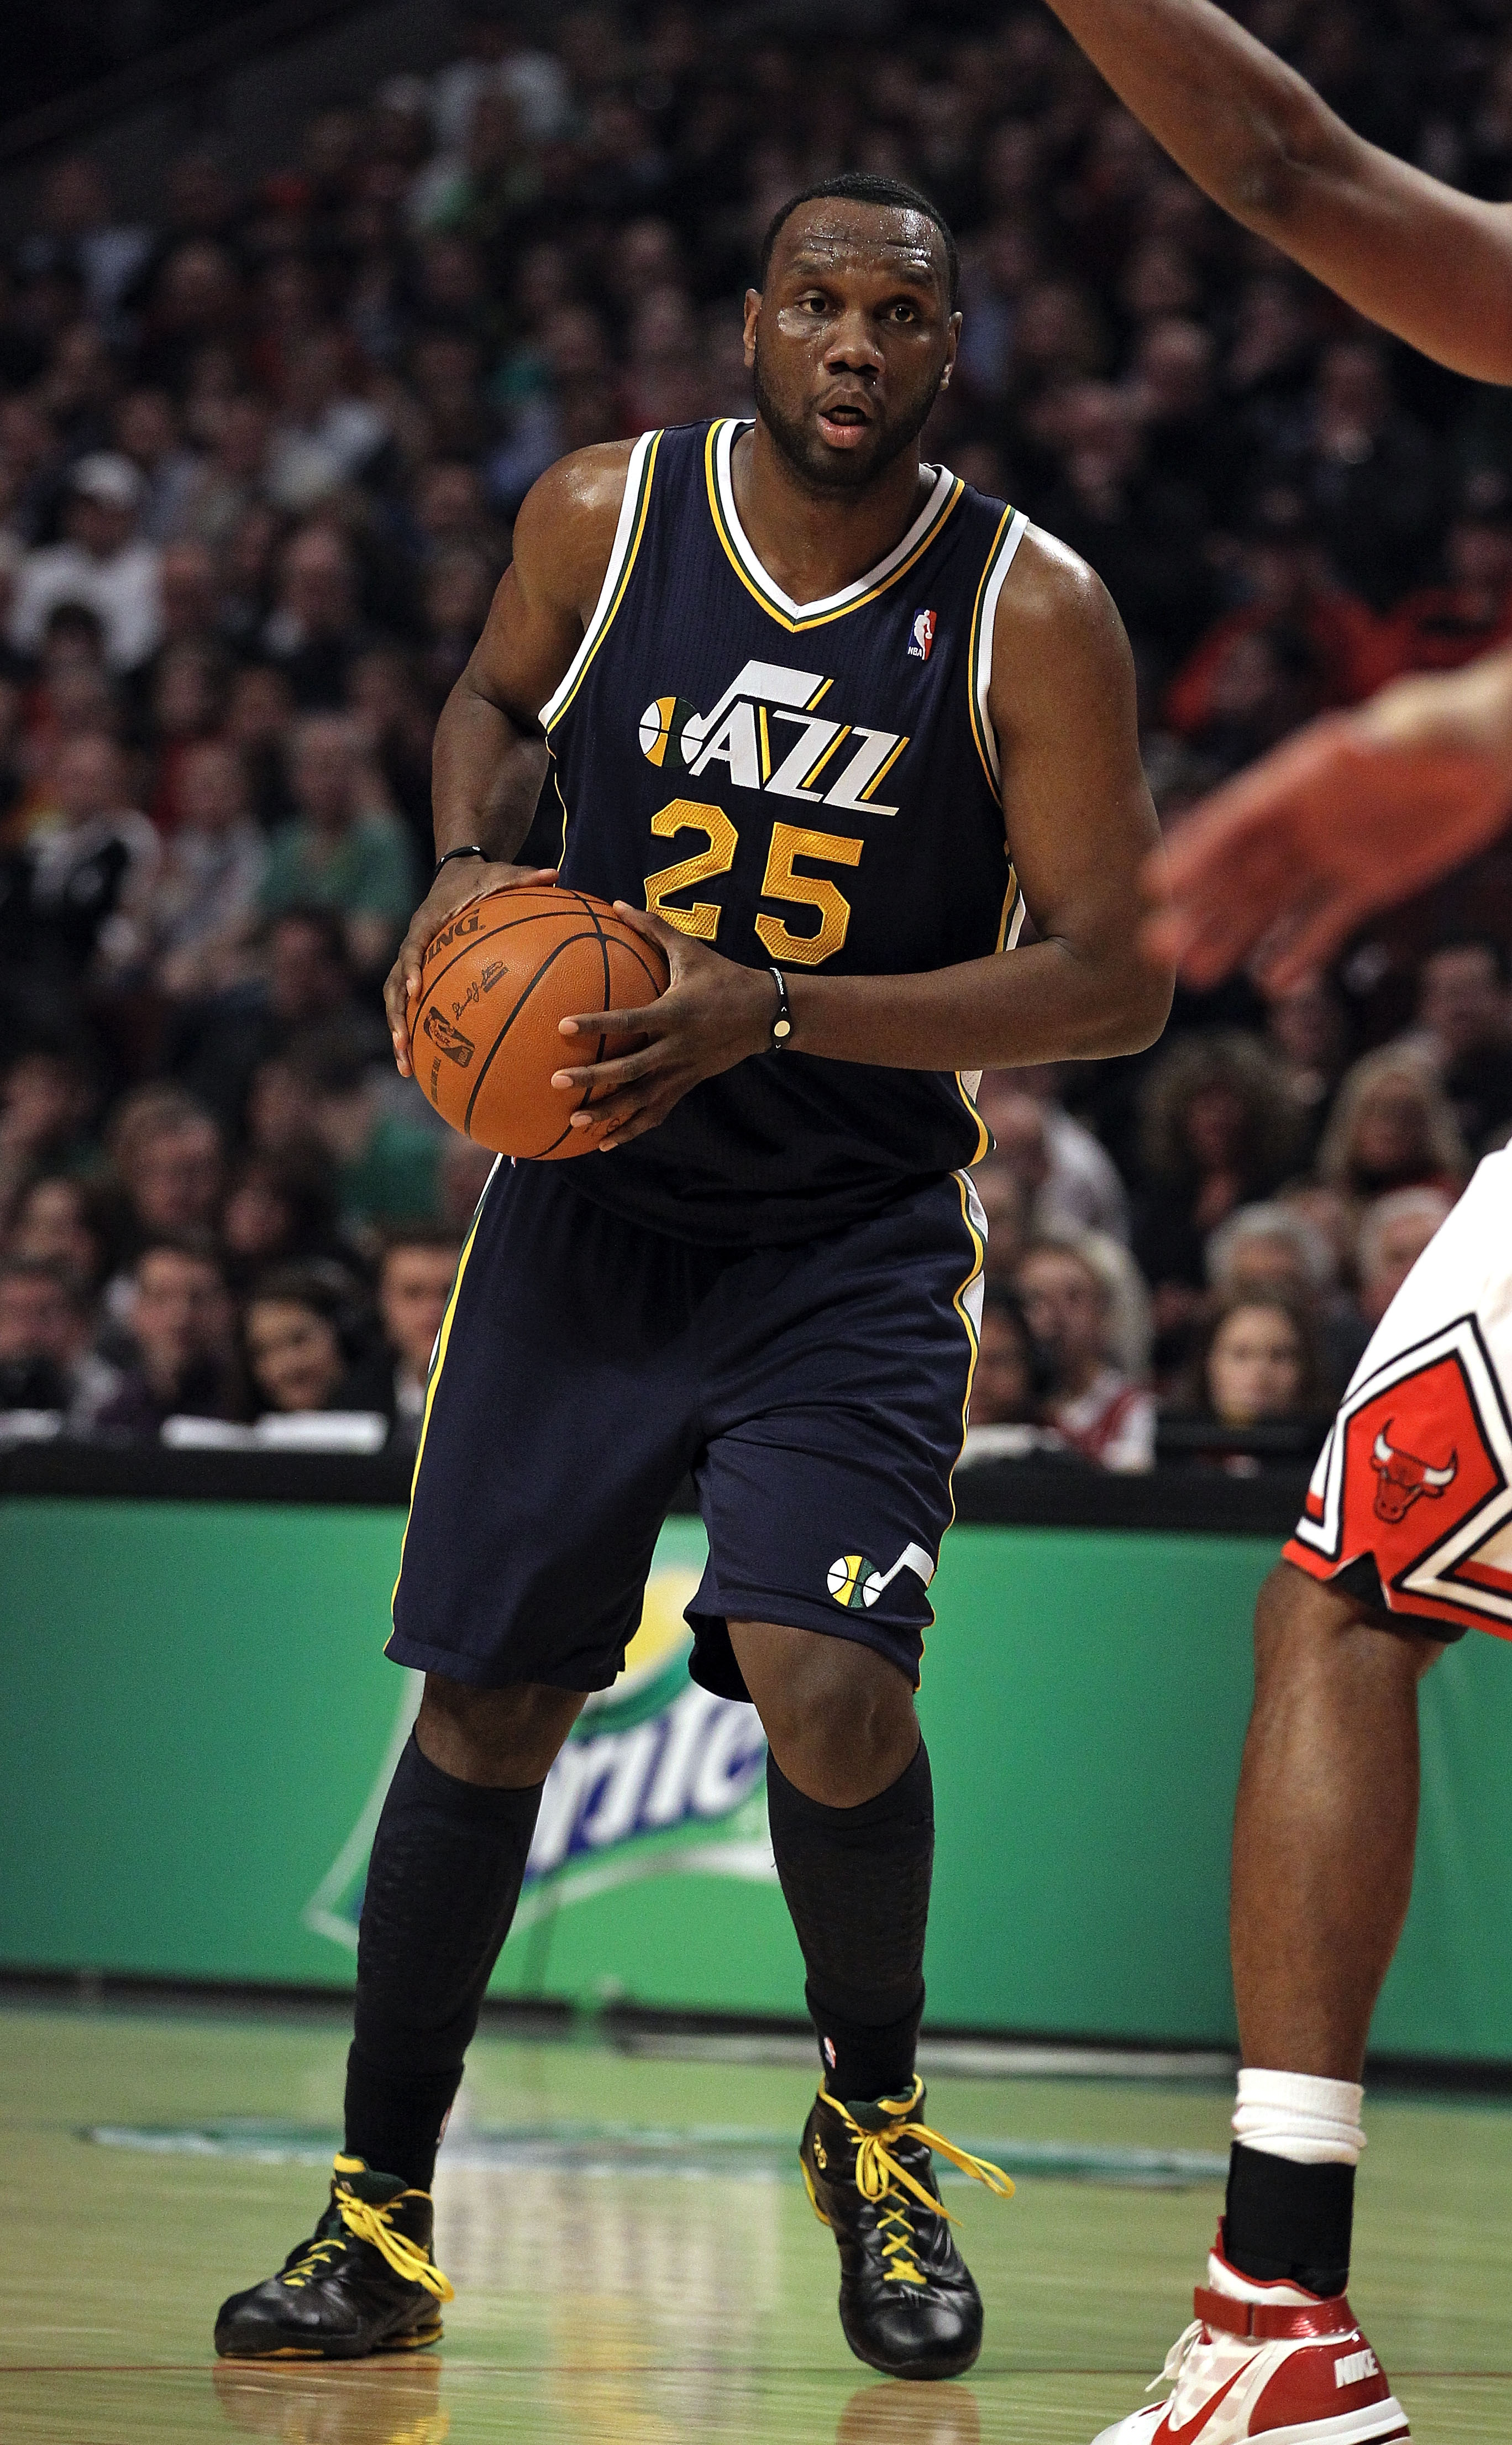 CHICAGO, IL - MARCH 12: Al Jefferson #25 of the Utah Jazz looks to against the Chicago Bulls at the United Center on March 12, 2011 in Chicago, Illinois. The Bulls defeated the Jazz 118-100. NOTE TO USER: User expressly acknowledges and agrees that, by do